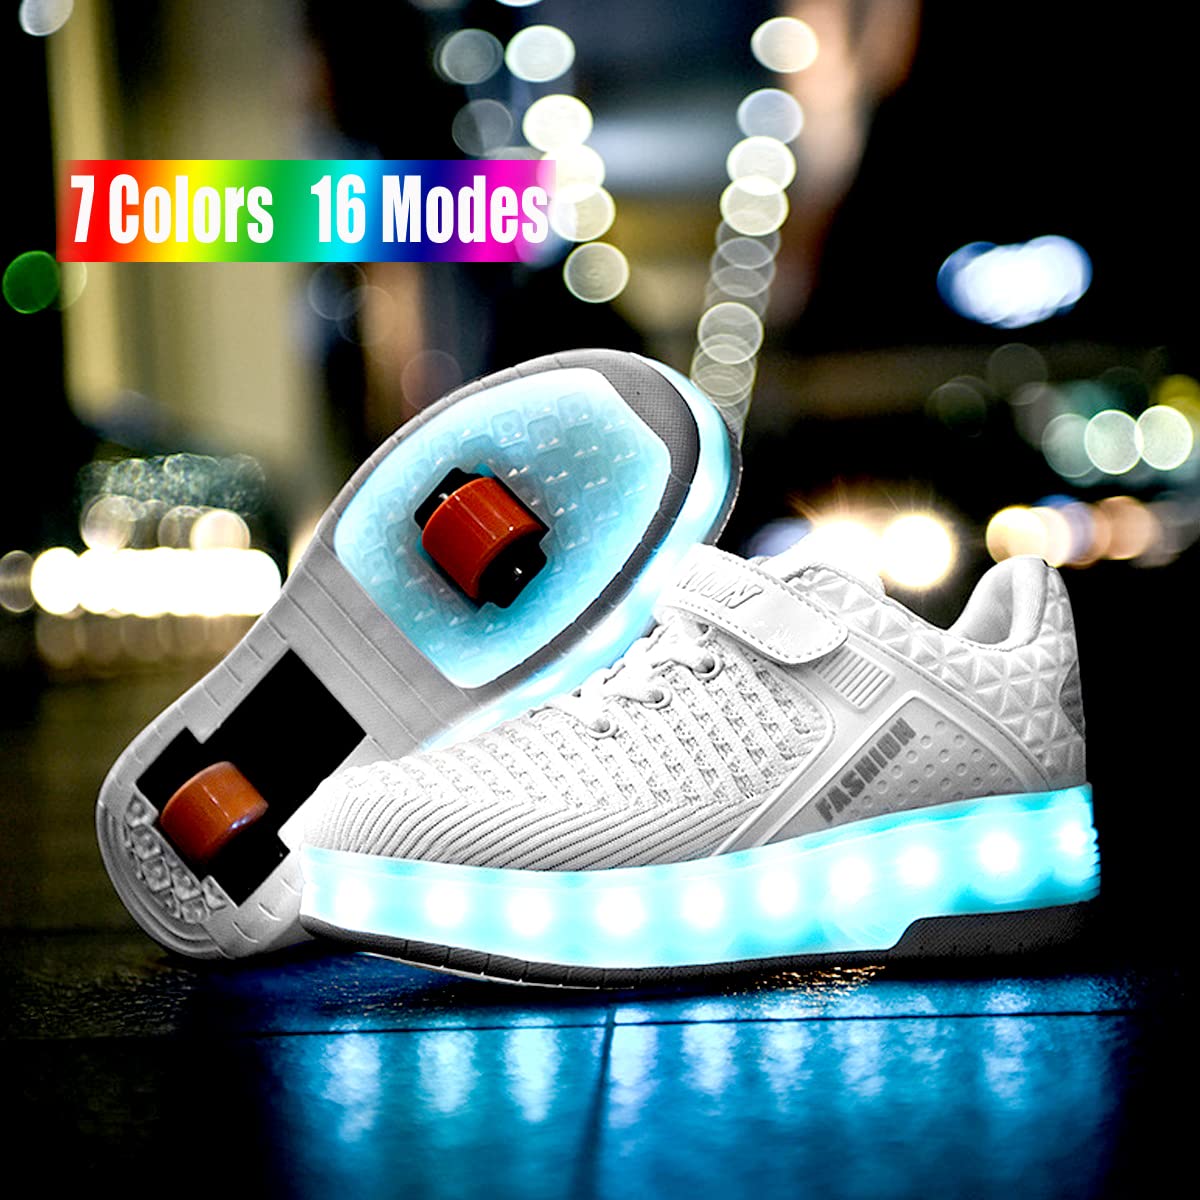 AIkuass Wheely Shoes for Kids Roller Shoes USB Rechargeable LED Light Up Wheel Shoes Skate Sneaker Shoes for Boys Girls Kids (6 Big Kid / EU39, White)